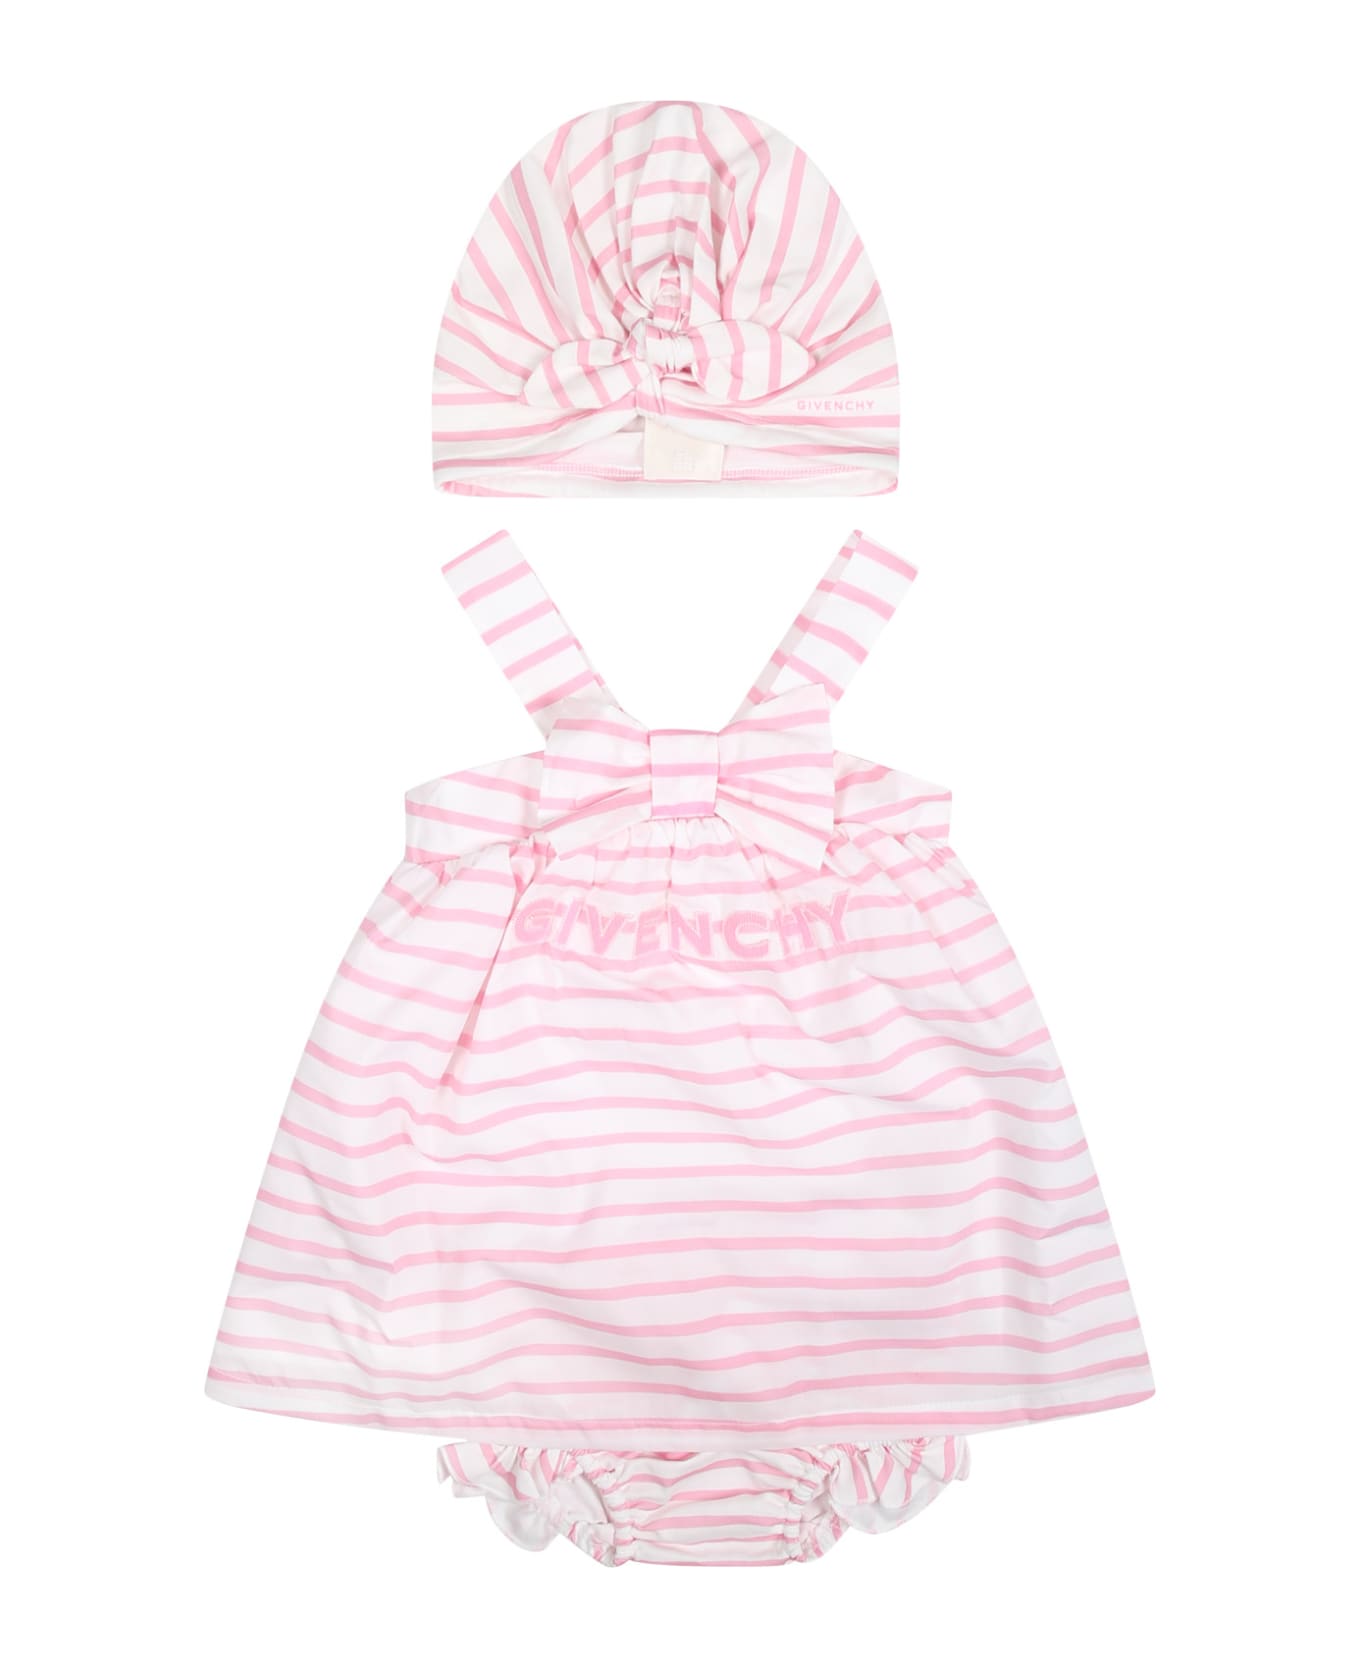 Givenchy Pink Dress For Baby Girl With Stripes - Pink